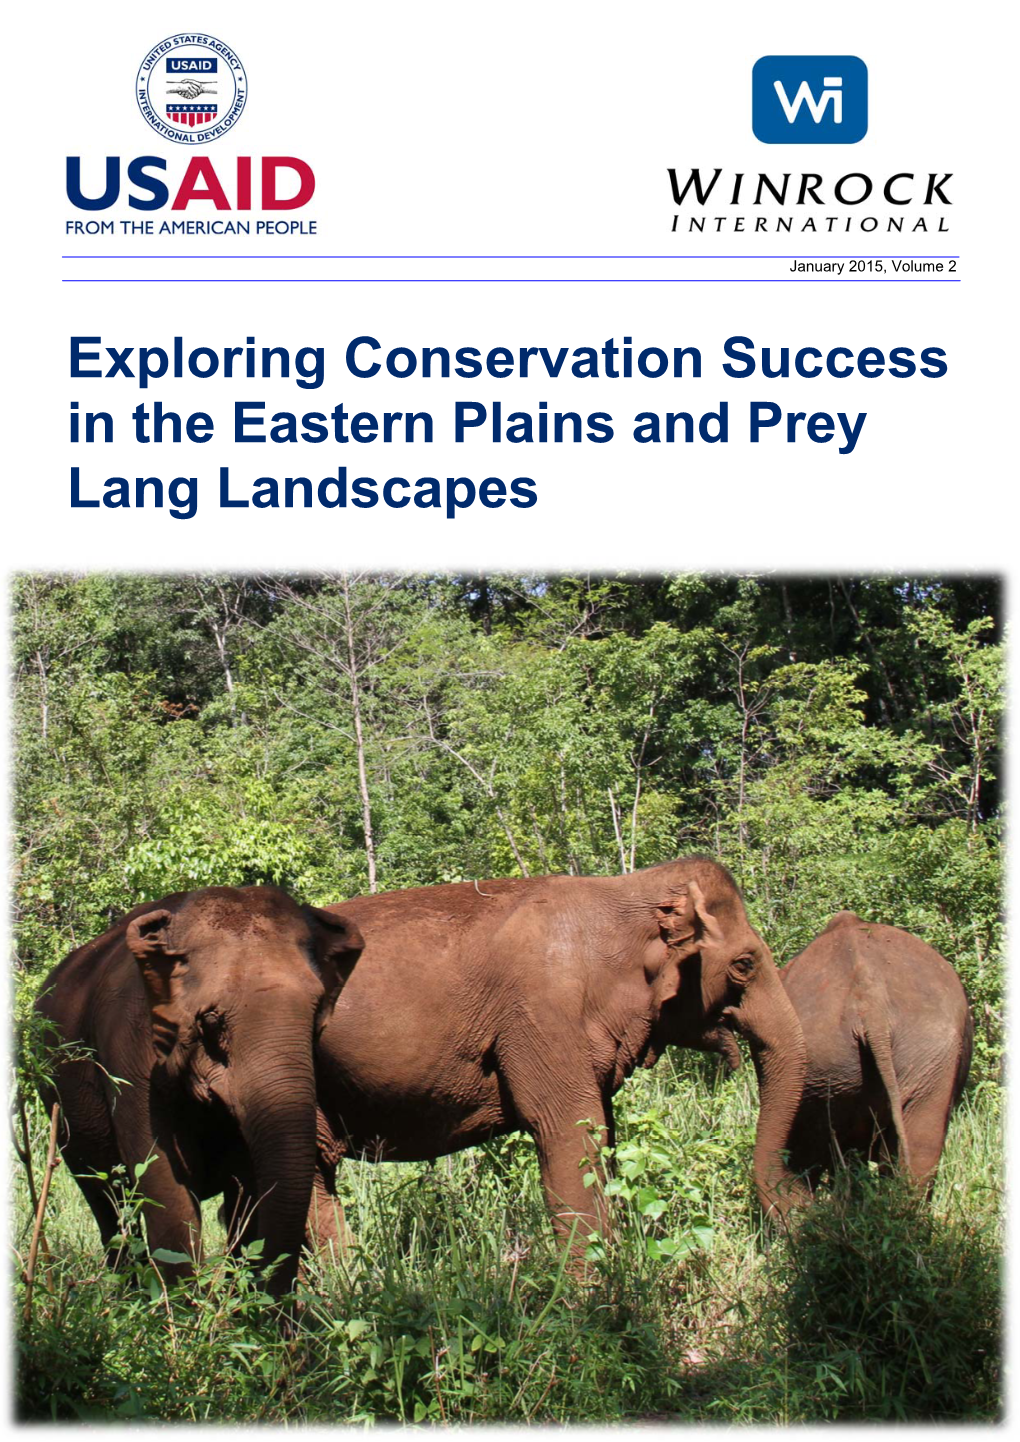 Exploring the Conservation Success in Eastern Plains and Prey Lang Landscapes.Pub